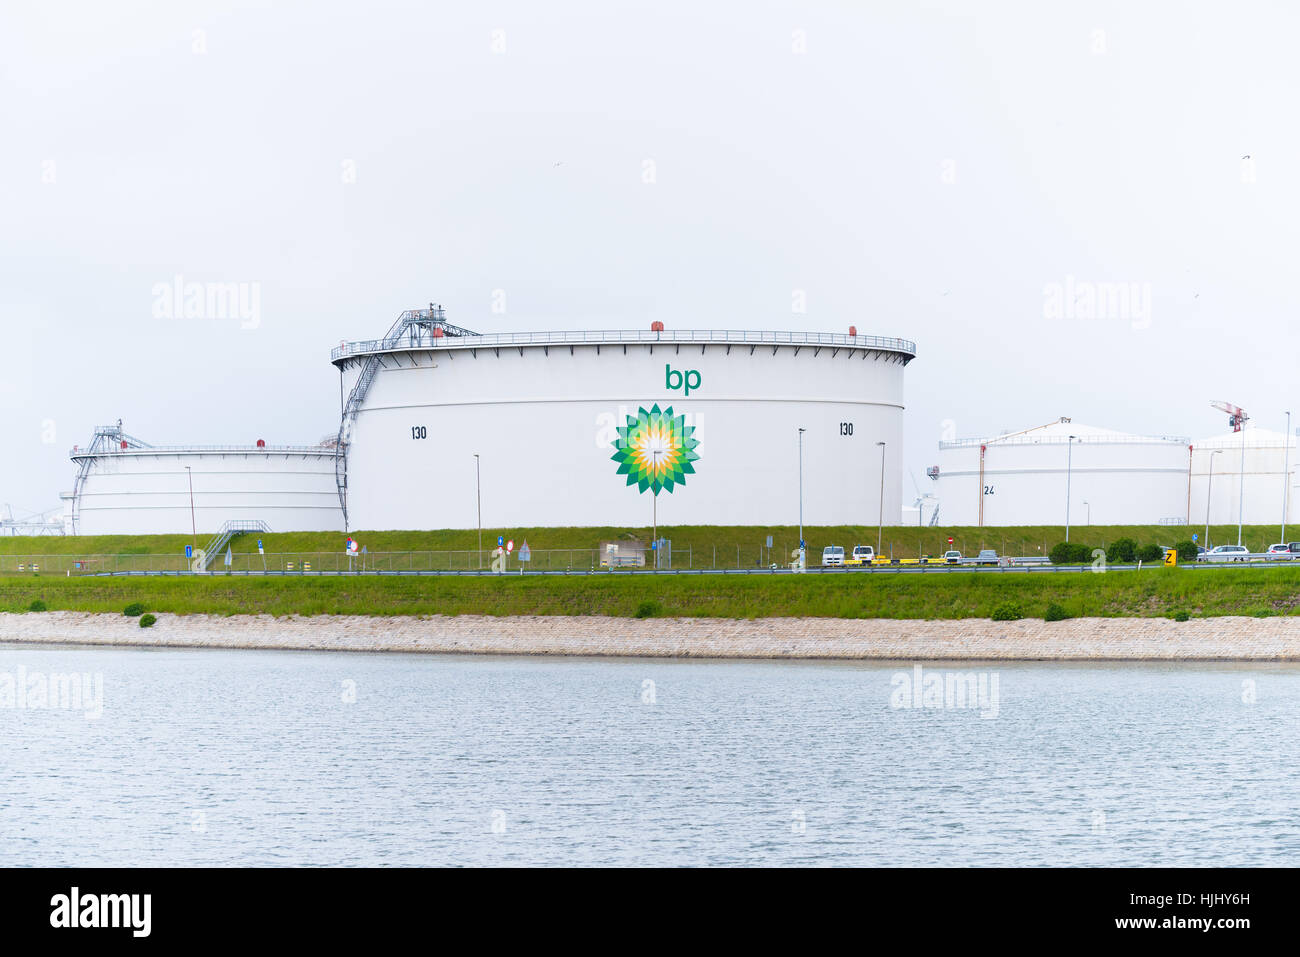 ROTTERDAM, NETHERLANDS - MAY 14, 2016: large BP oil tanks in the rotterdam harbor area. Stock Photo